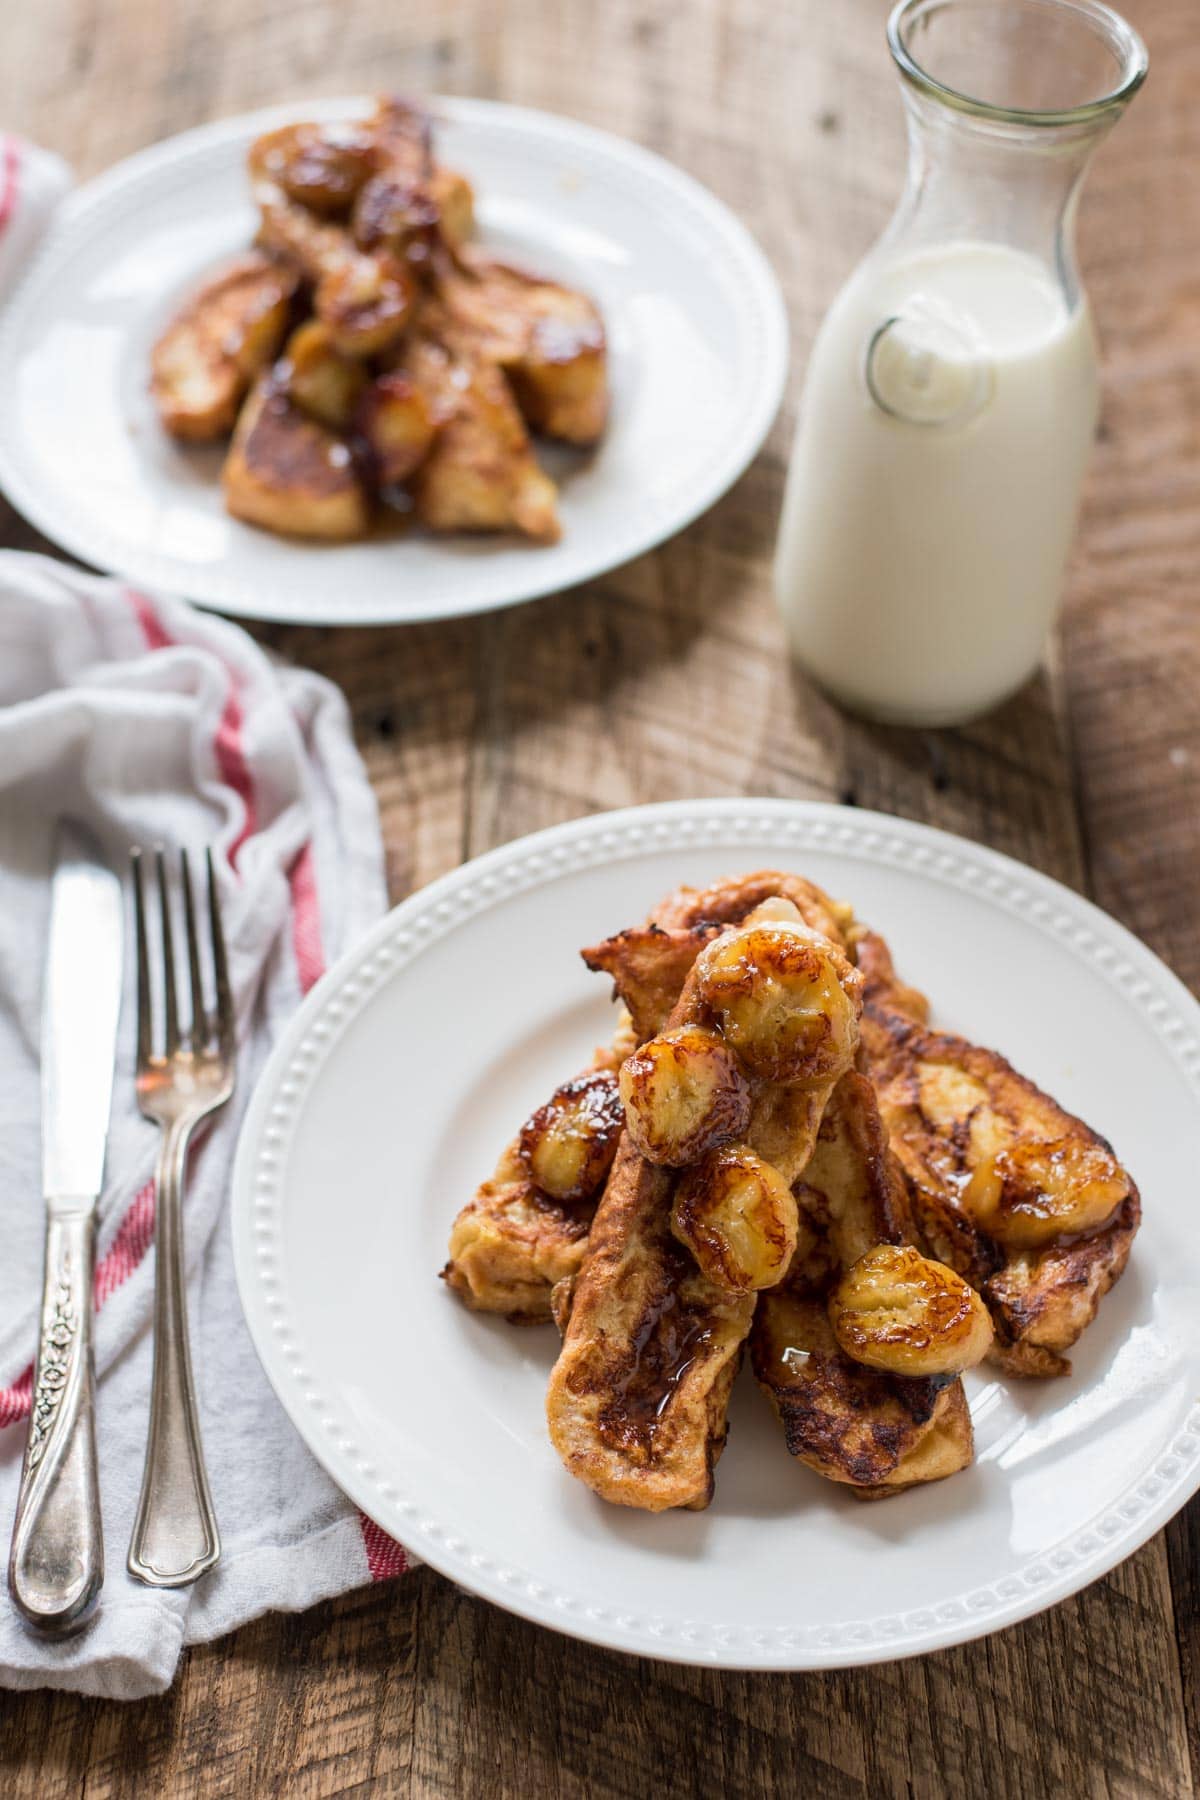 Dress up your French toast routine with these Challah French Toast Sticks with Caramelized Bananas. It's the perfect weekend breakfast!